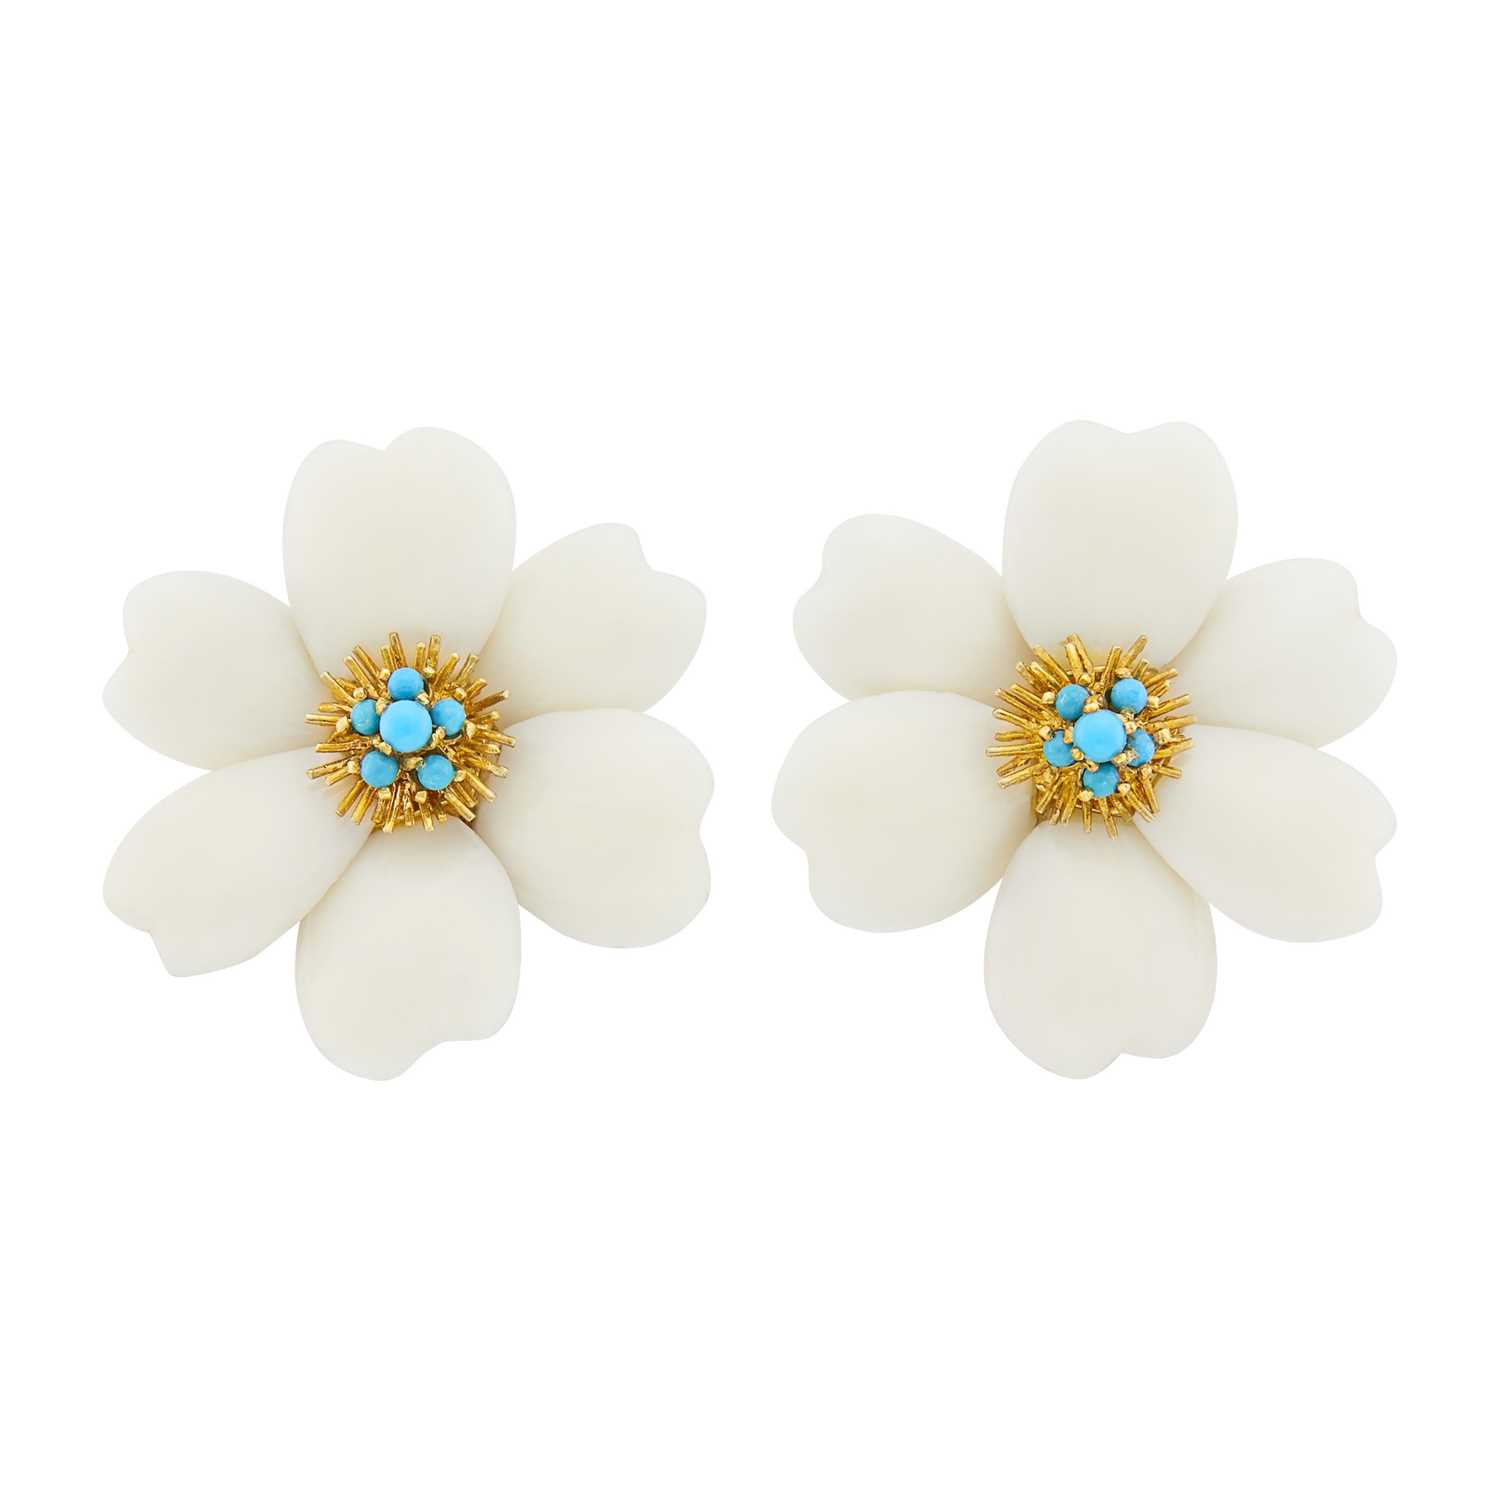 Lot 130 - Pair of Gold, White Coral and Turquoise Flower Earclips, France